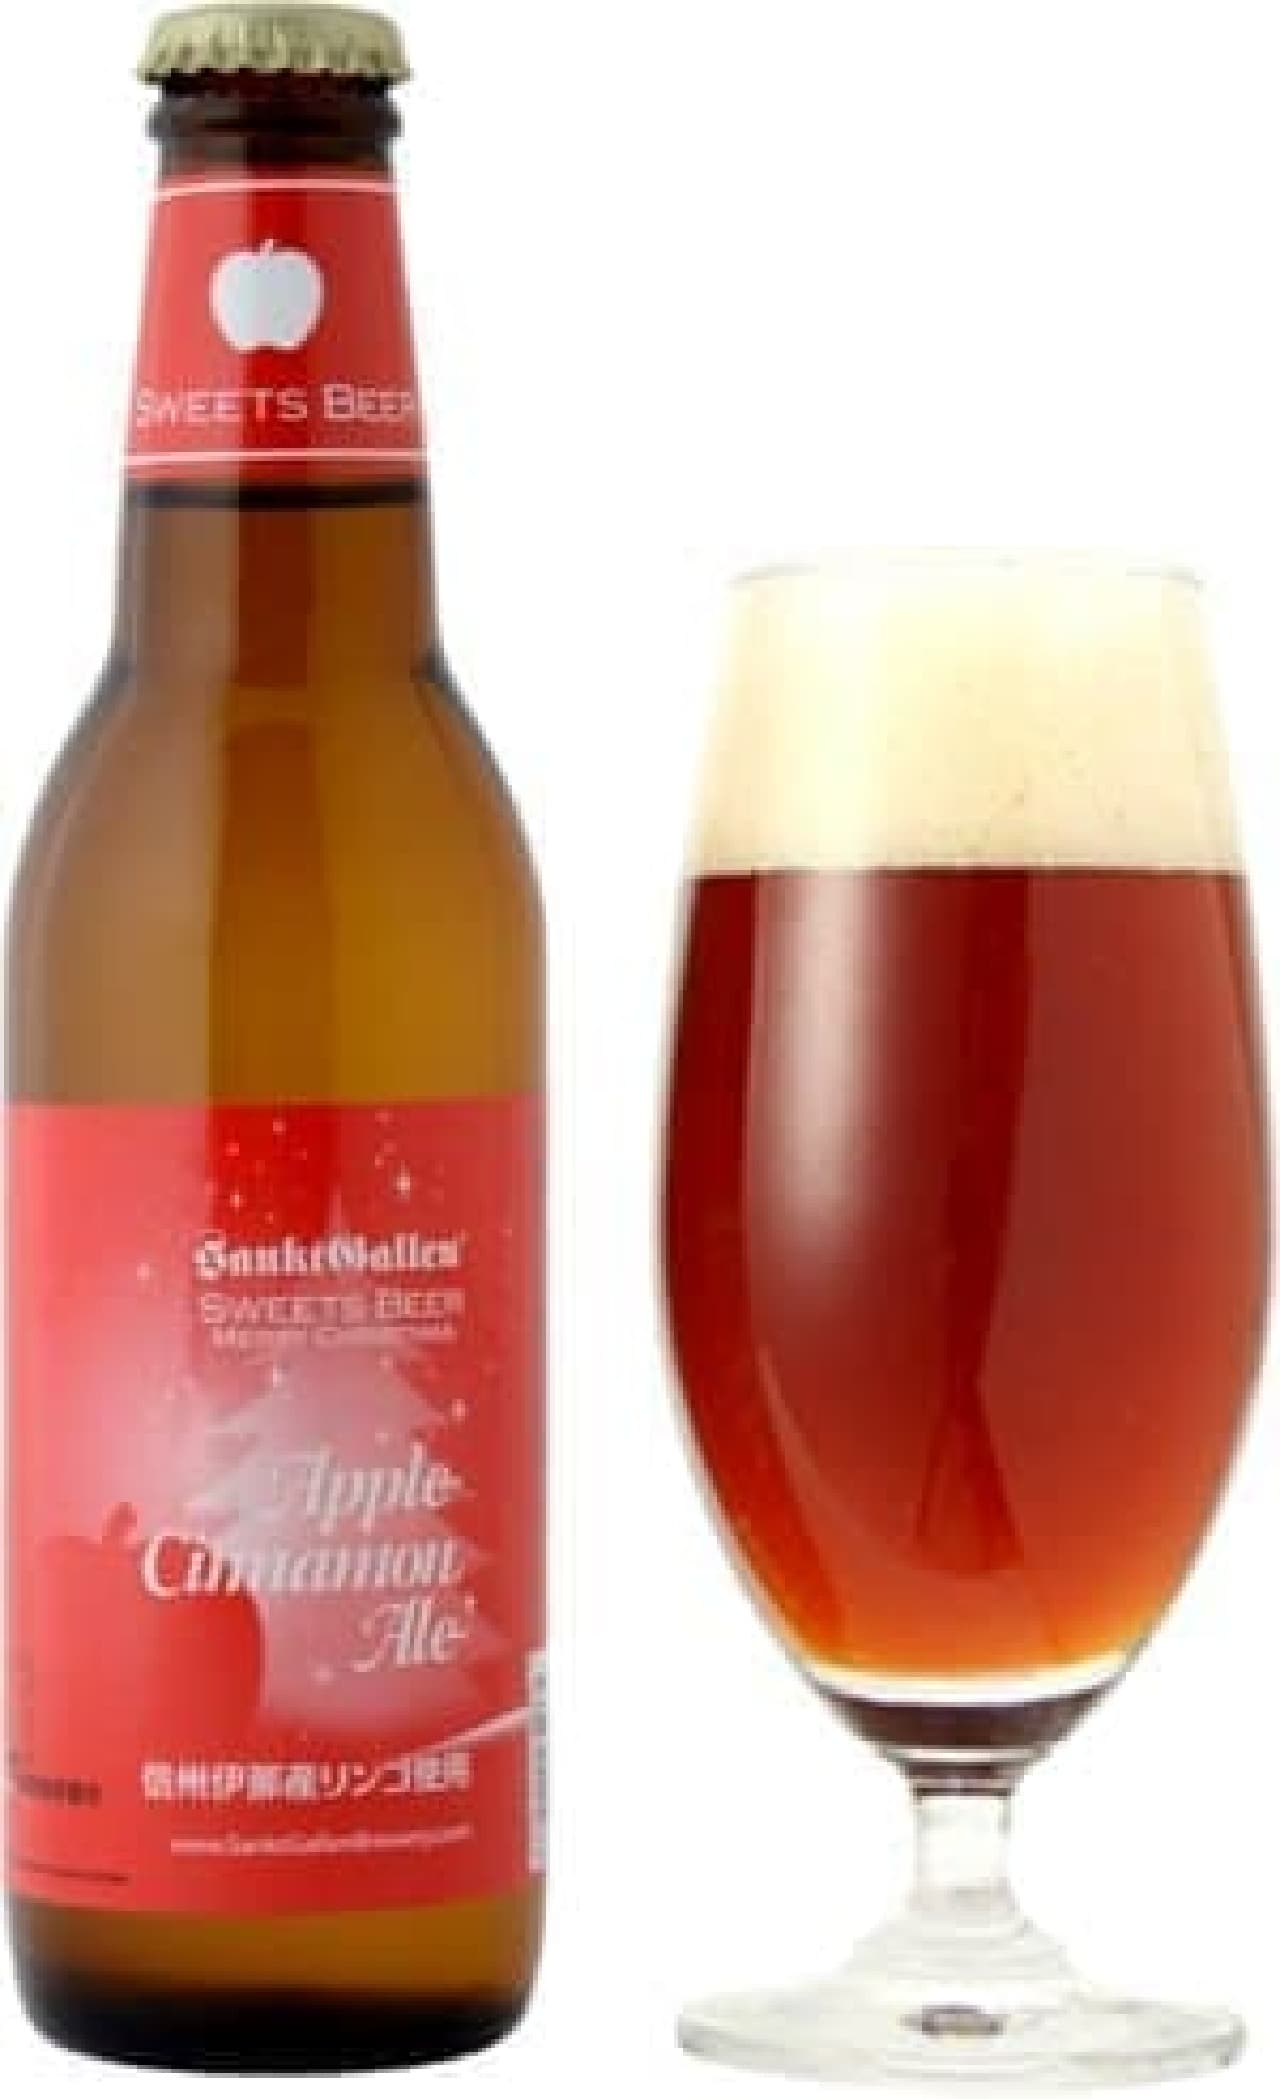 The first "Christmas label" is now available for Apple Cinnamon Ale!